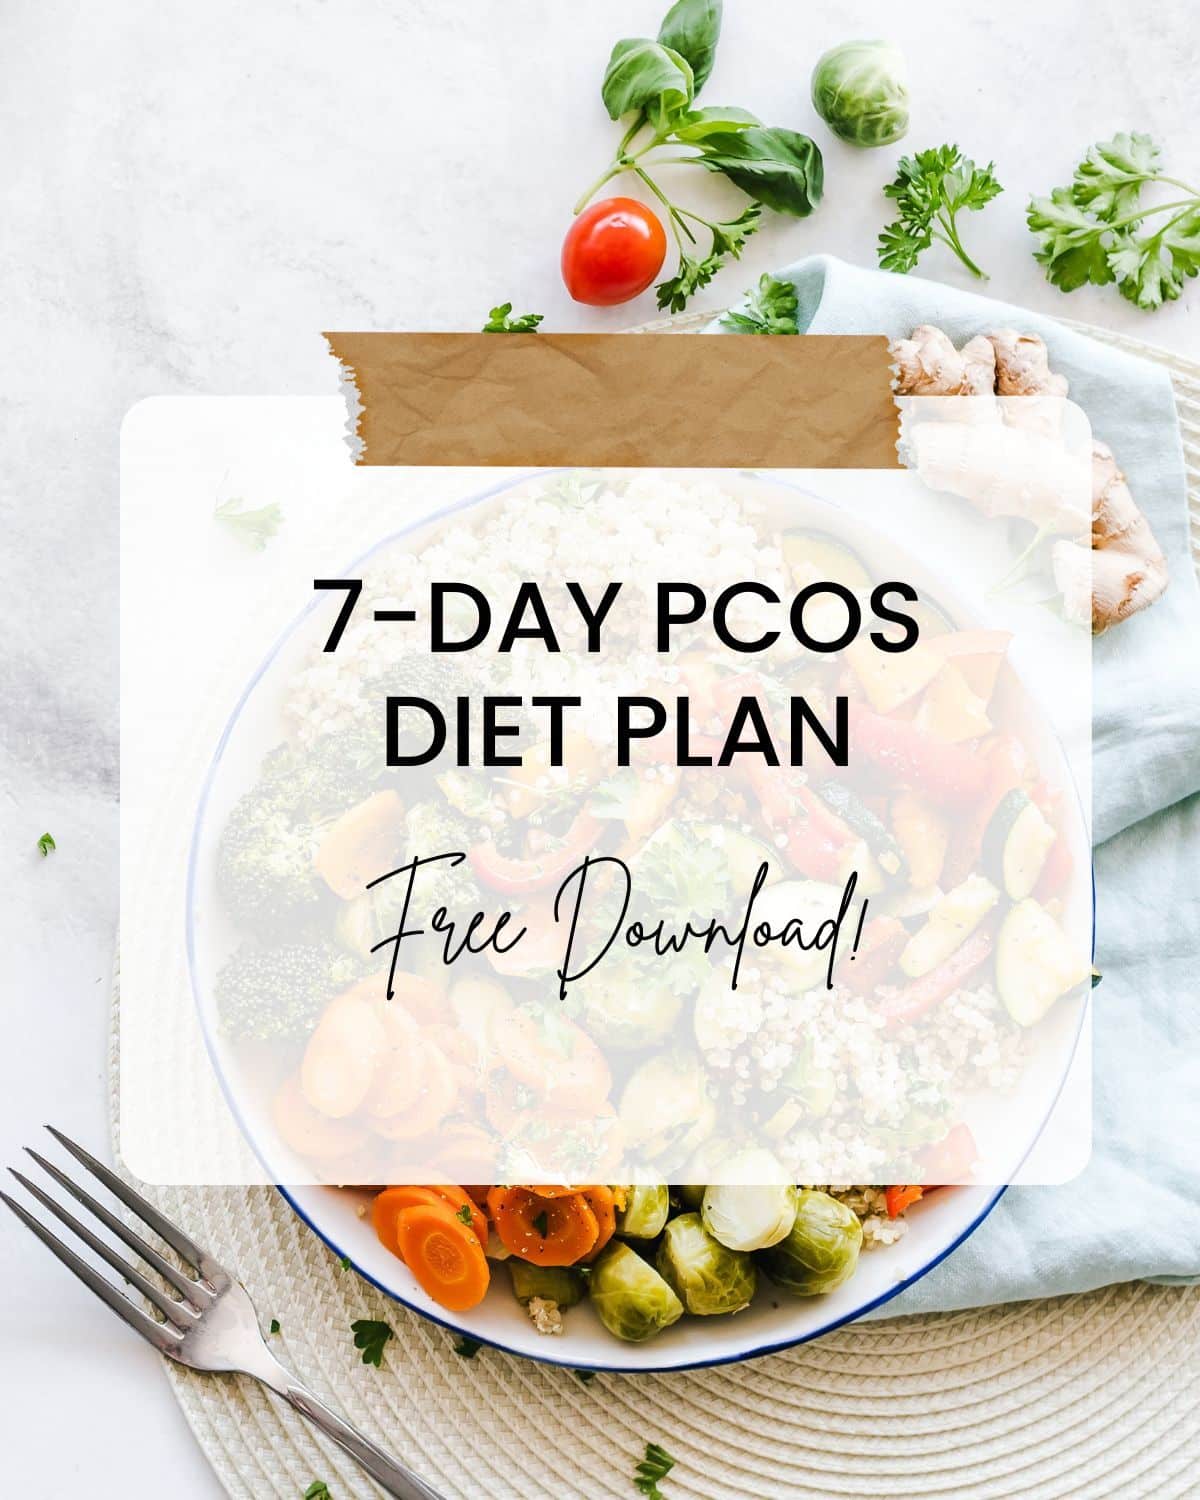 7 Day PCOS diet plan free download with background of bowl of salad with form on the table.